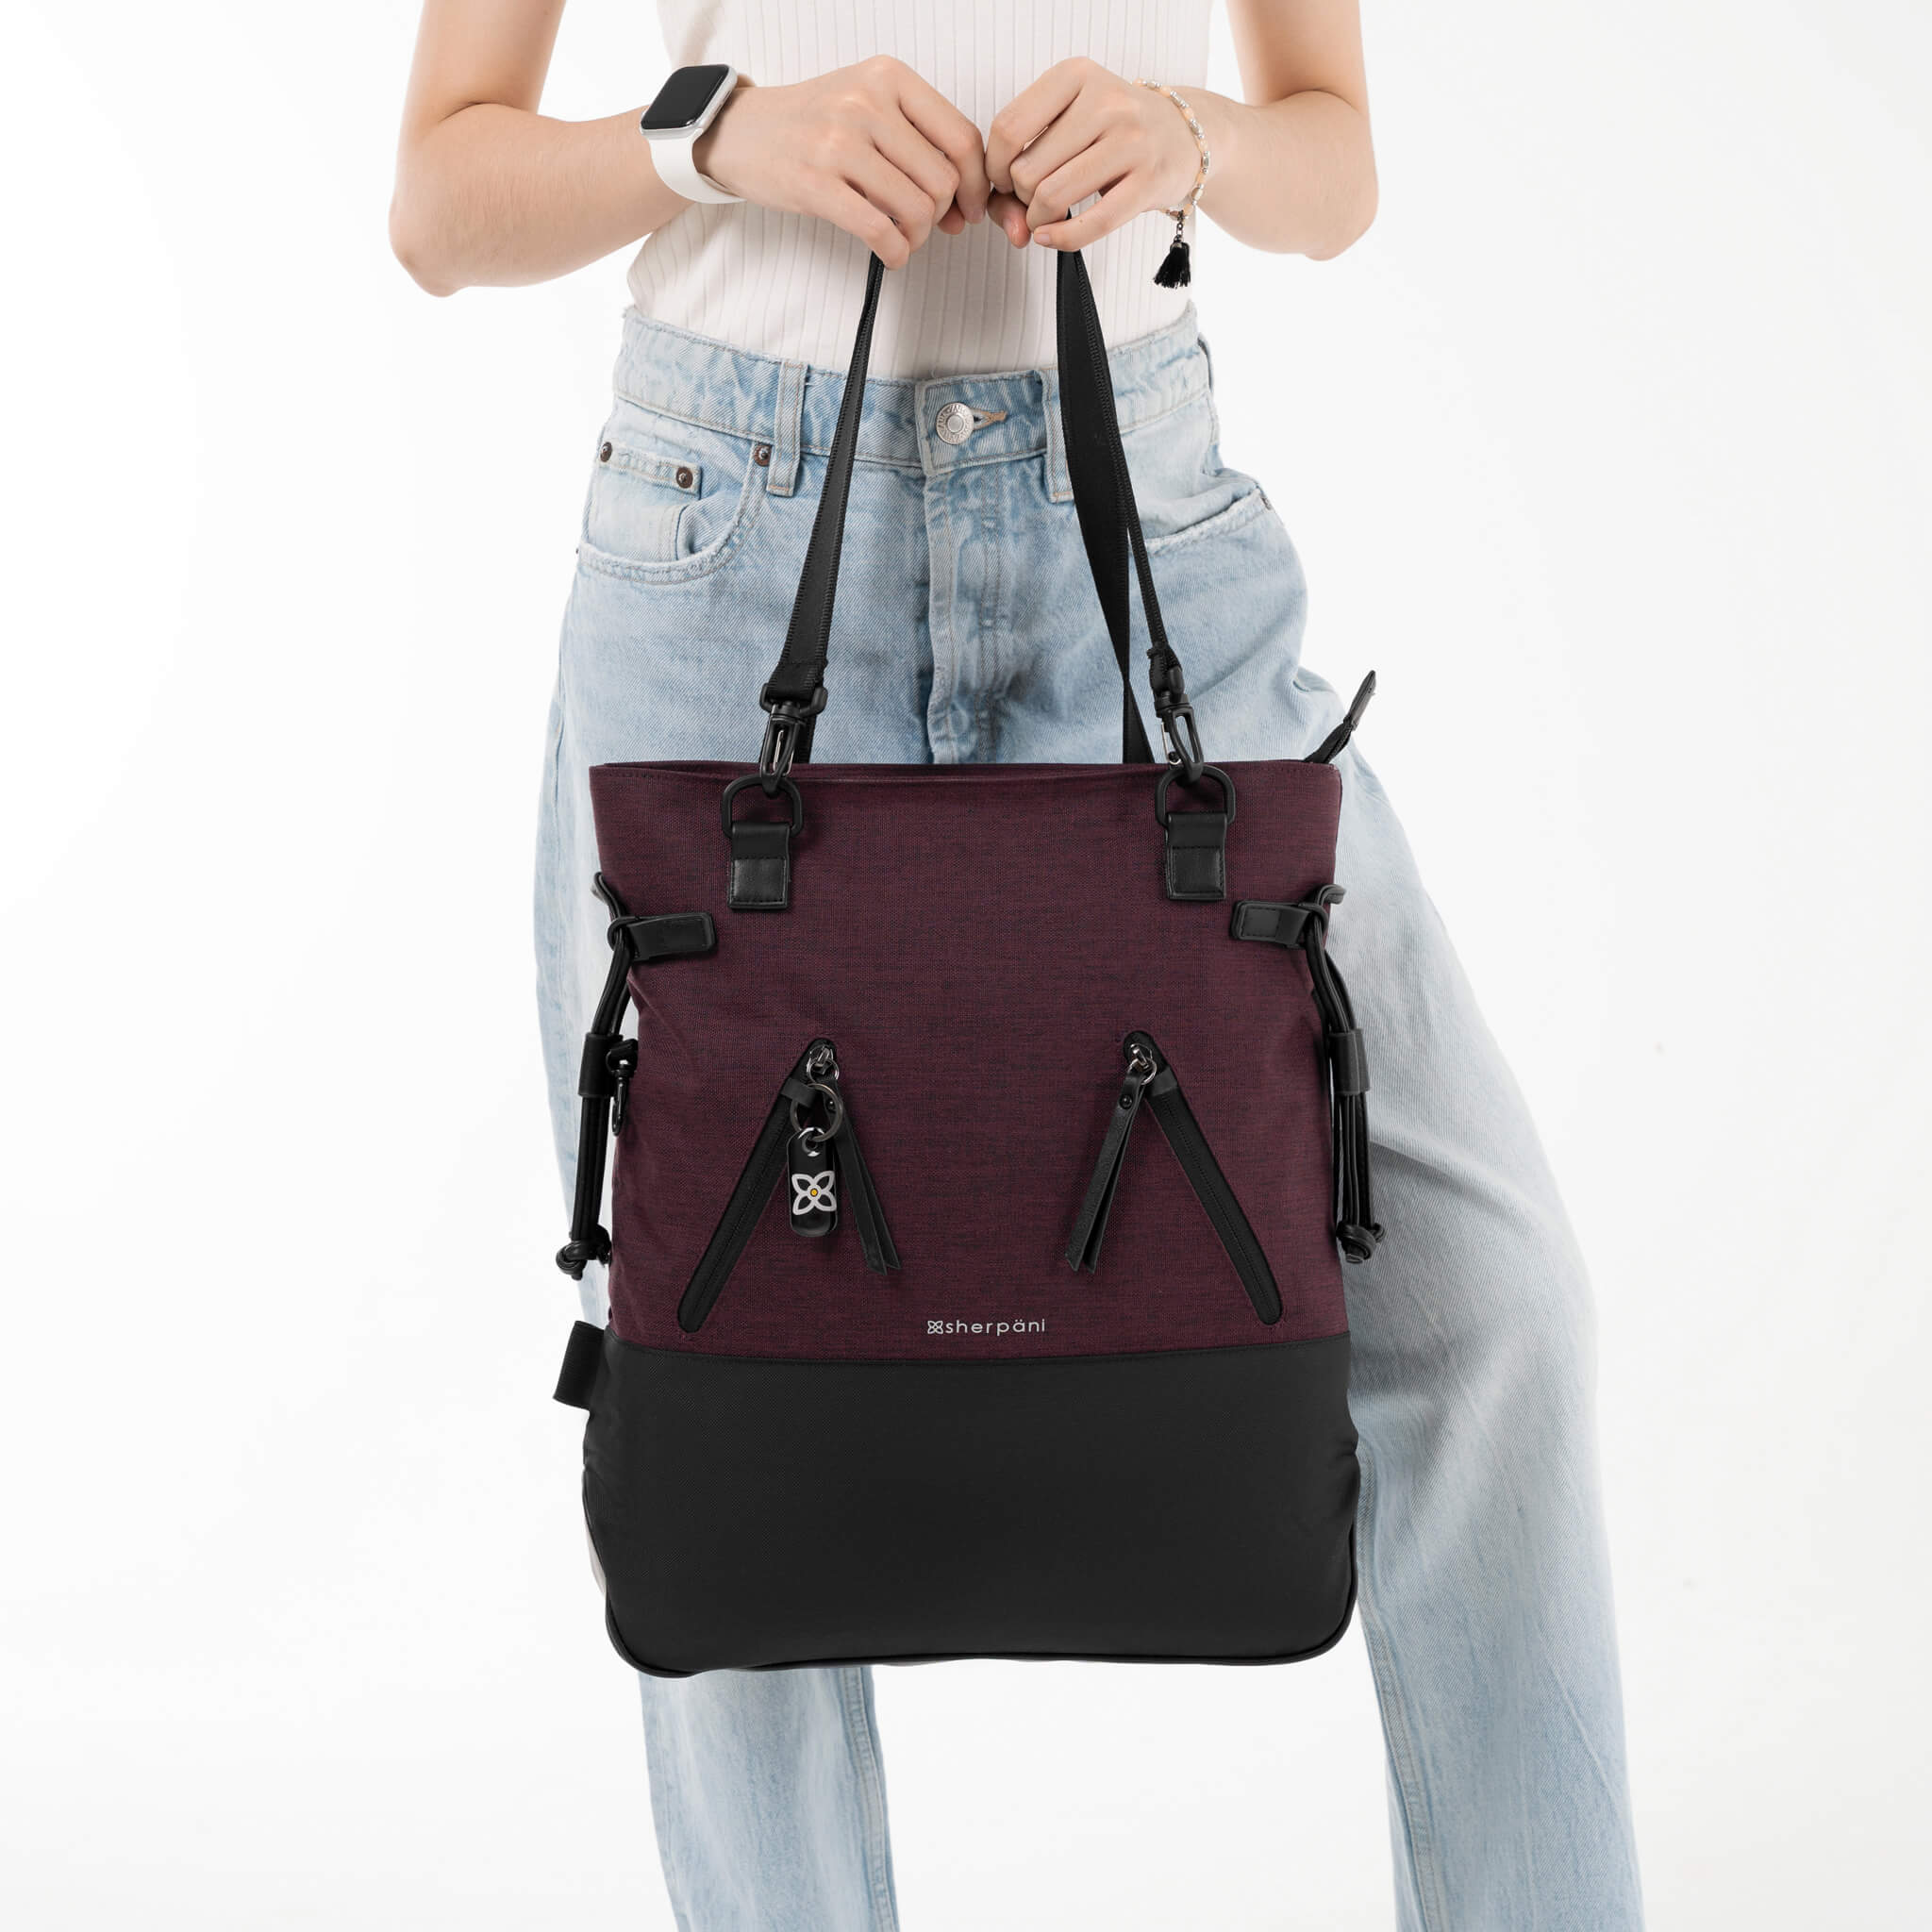 A model holding the Tempest in Merlot by the convertible tote bag handles. 